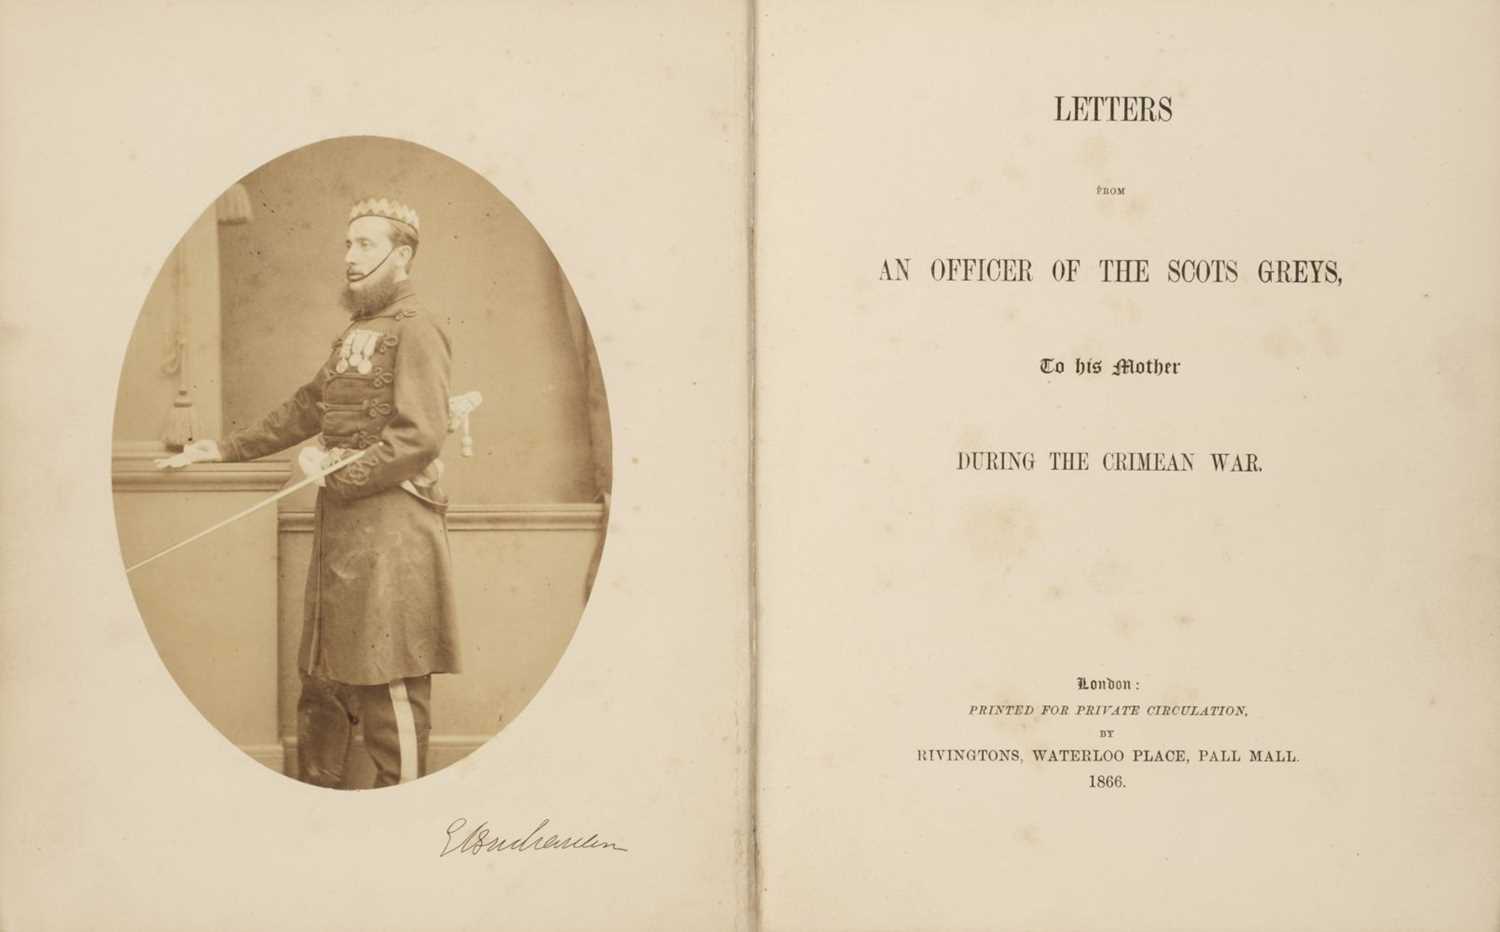 Lot 414 - Buchanan, George. Letters from an Officer of the Scots Greys..., 1866